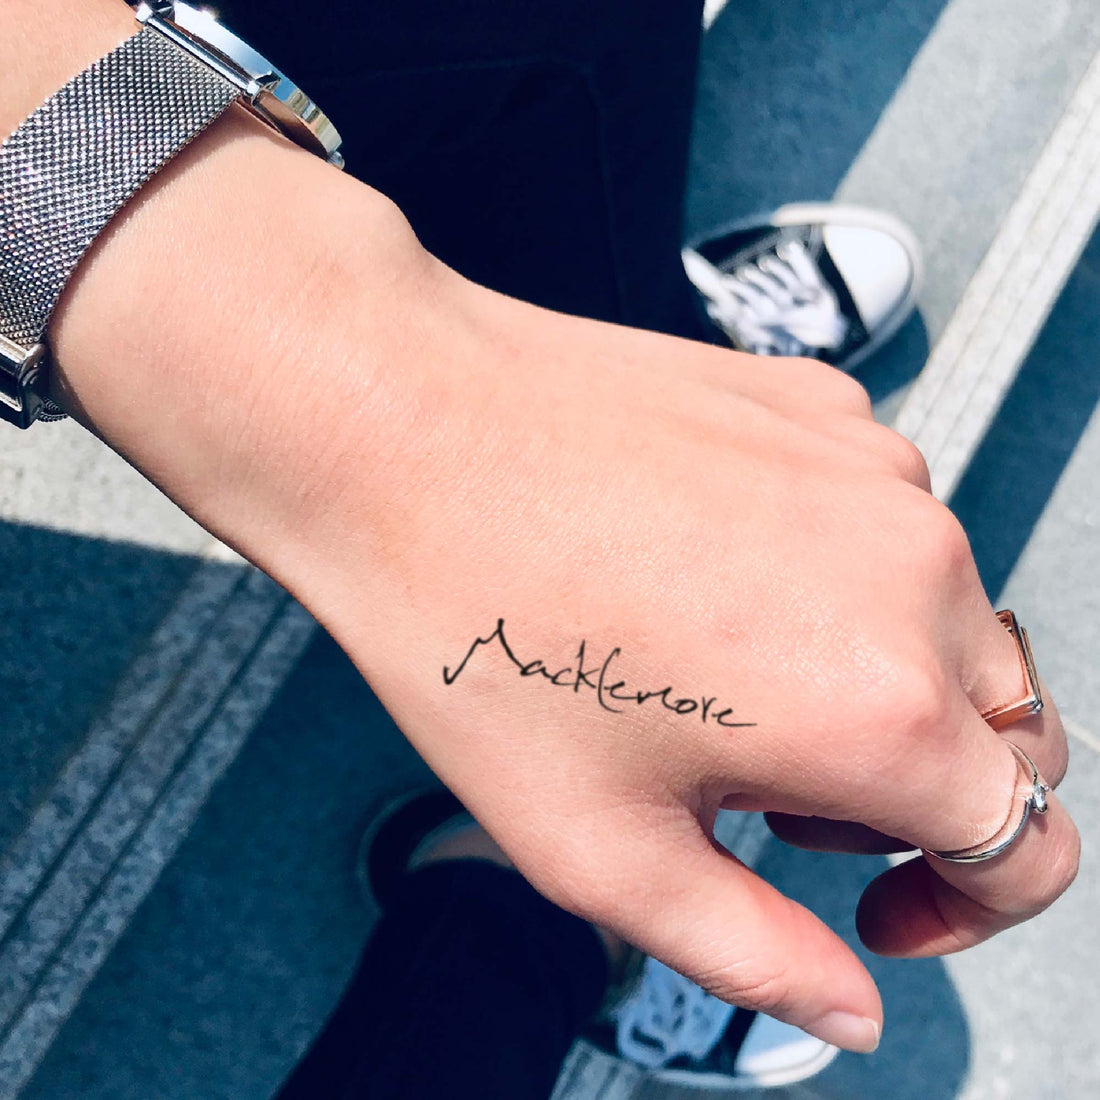 Macklemore custom temporary tattoo sticker design idea inspiration meanings removal arm wrist hand words font name signature calligraphy lyrics tour concert outfits merch accessory gift souvenir costumes wear dress up code